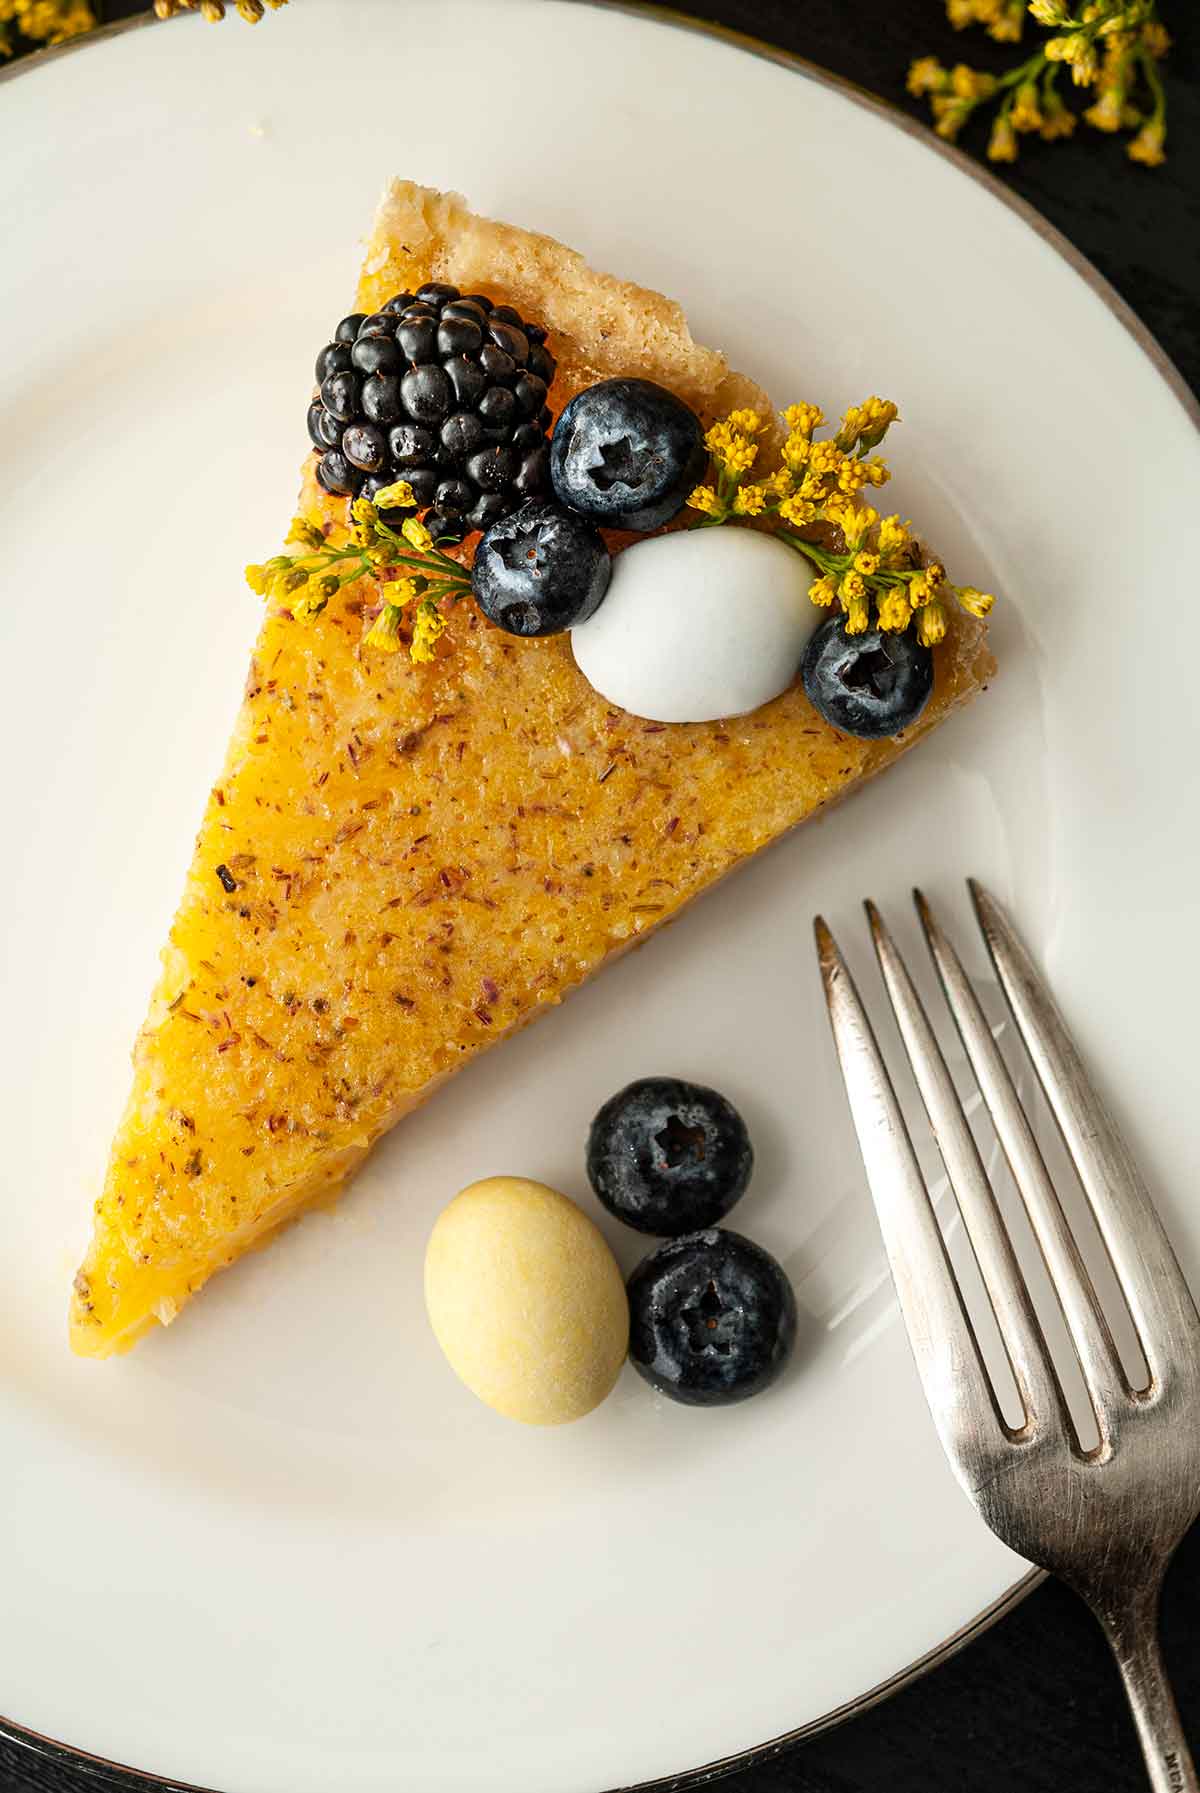 A slice of lavender lemon Easter tart on a plate, garnished with berries, flowers and chocolate eggs.